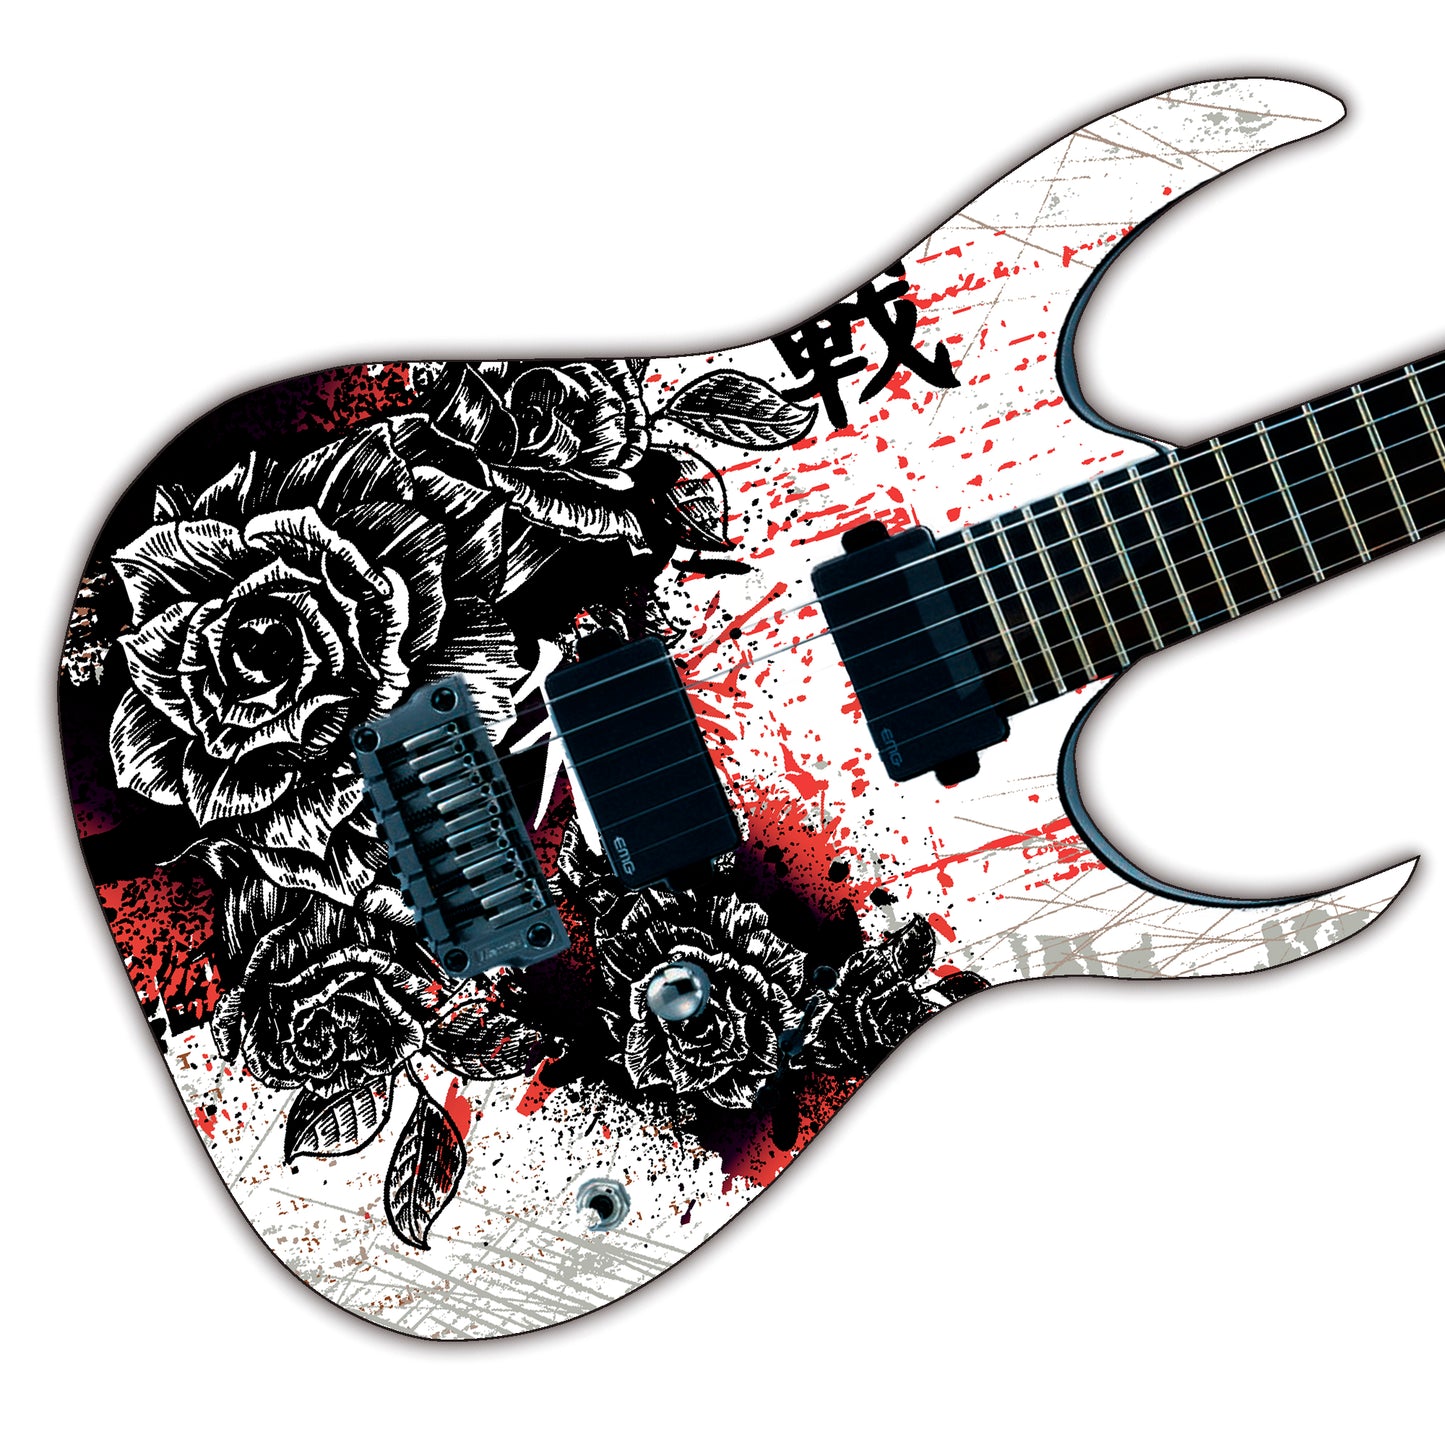 Guitar, Bass or Acoustic Skin Wrap Laminated Vinyl Decal Sticker The Black Rose GS81